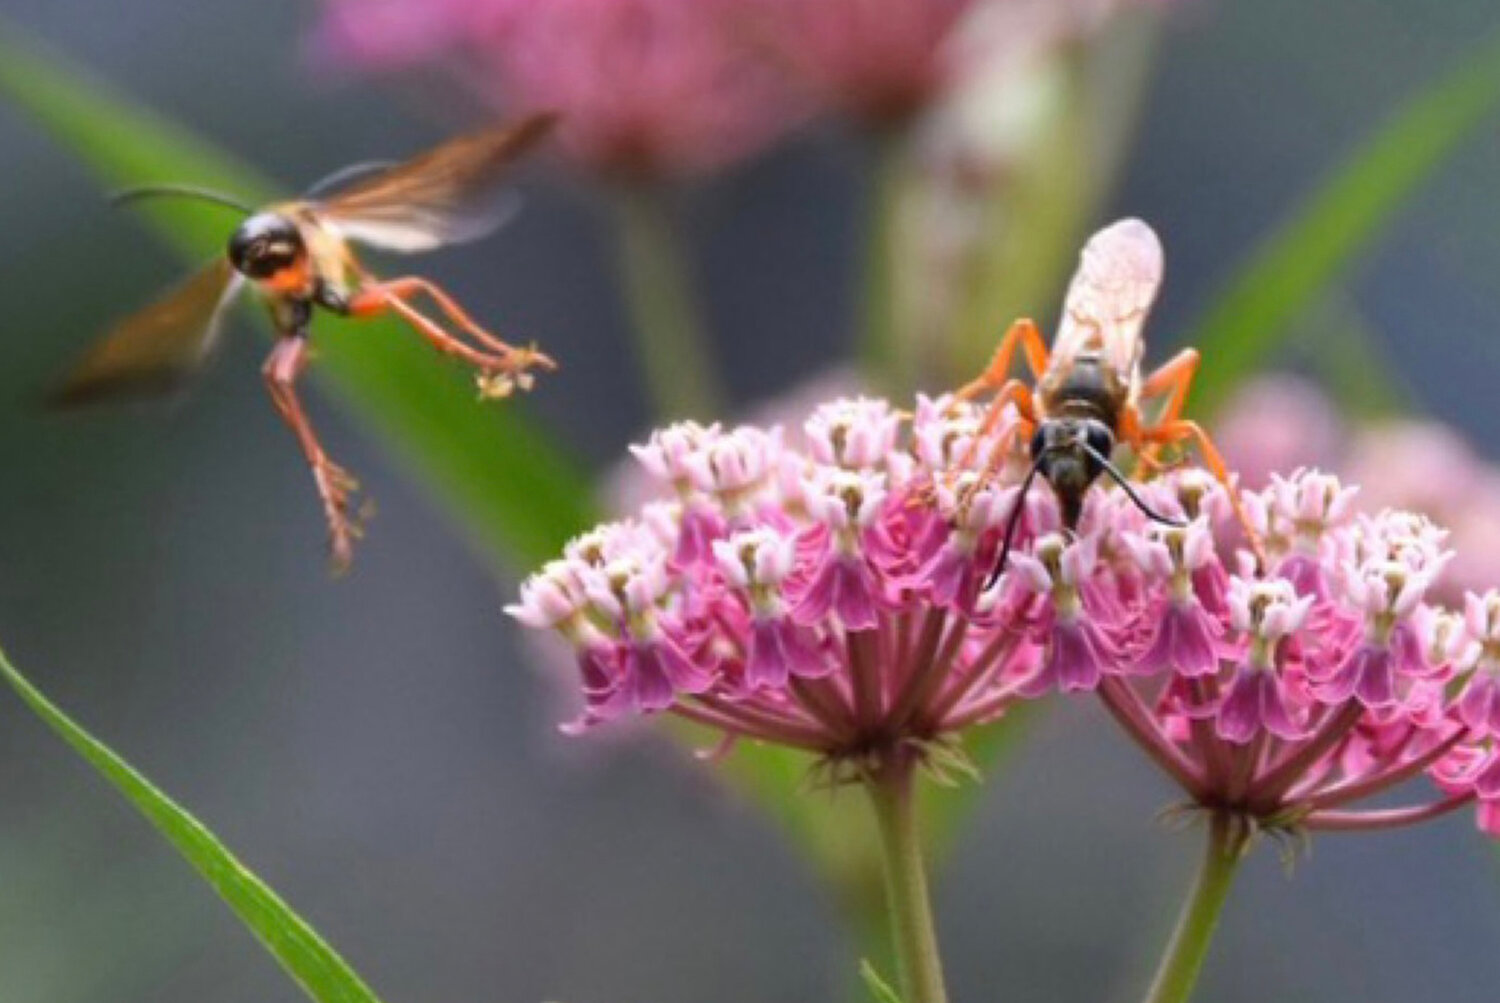 Insects visiting blooms on a Swamp MIlkweed plant, available at Prickly Ed’s in Barrington